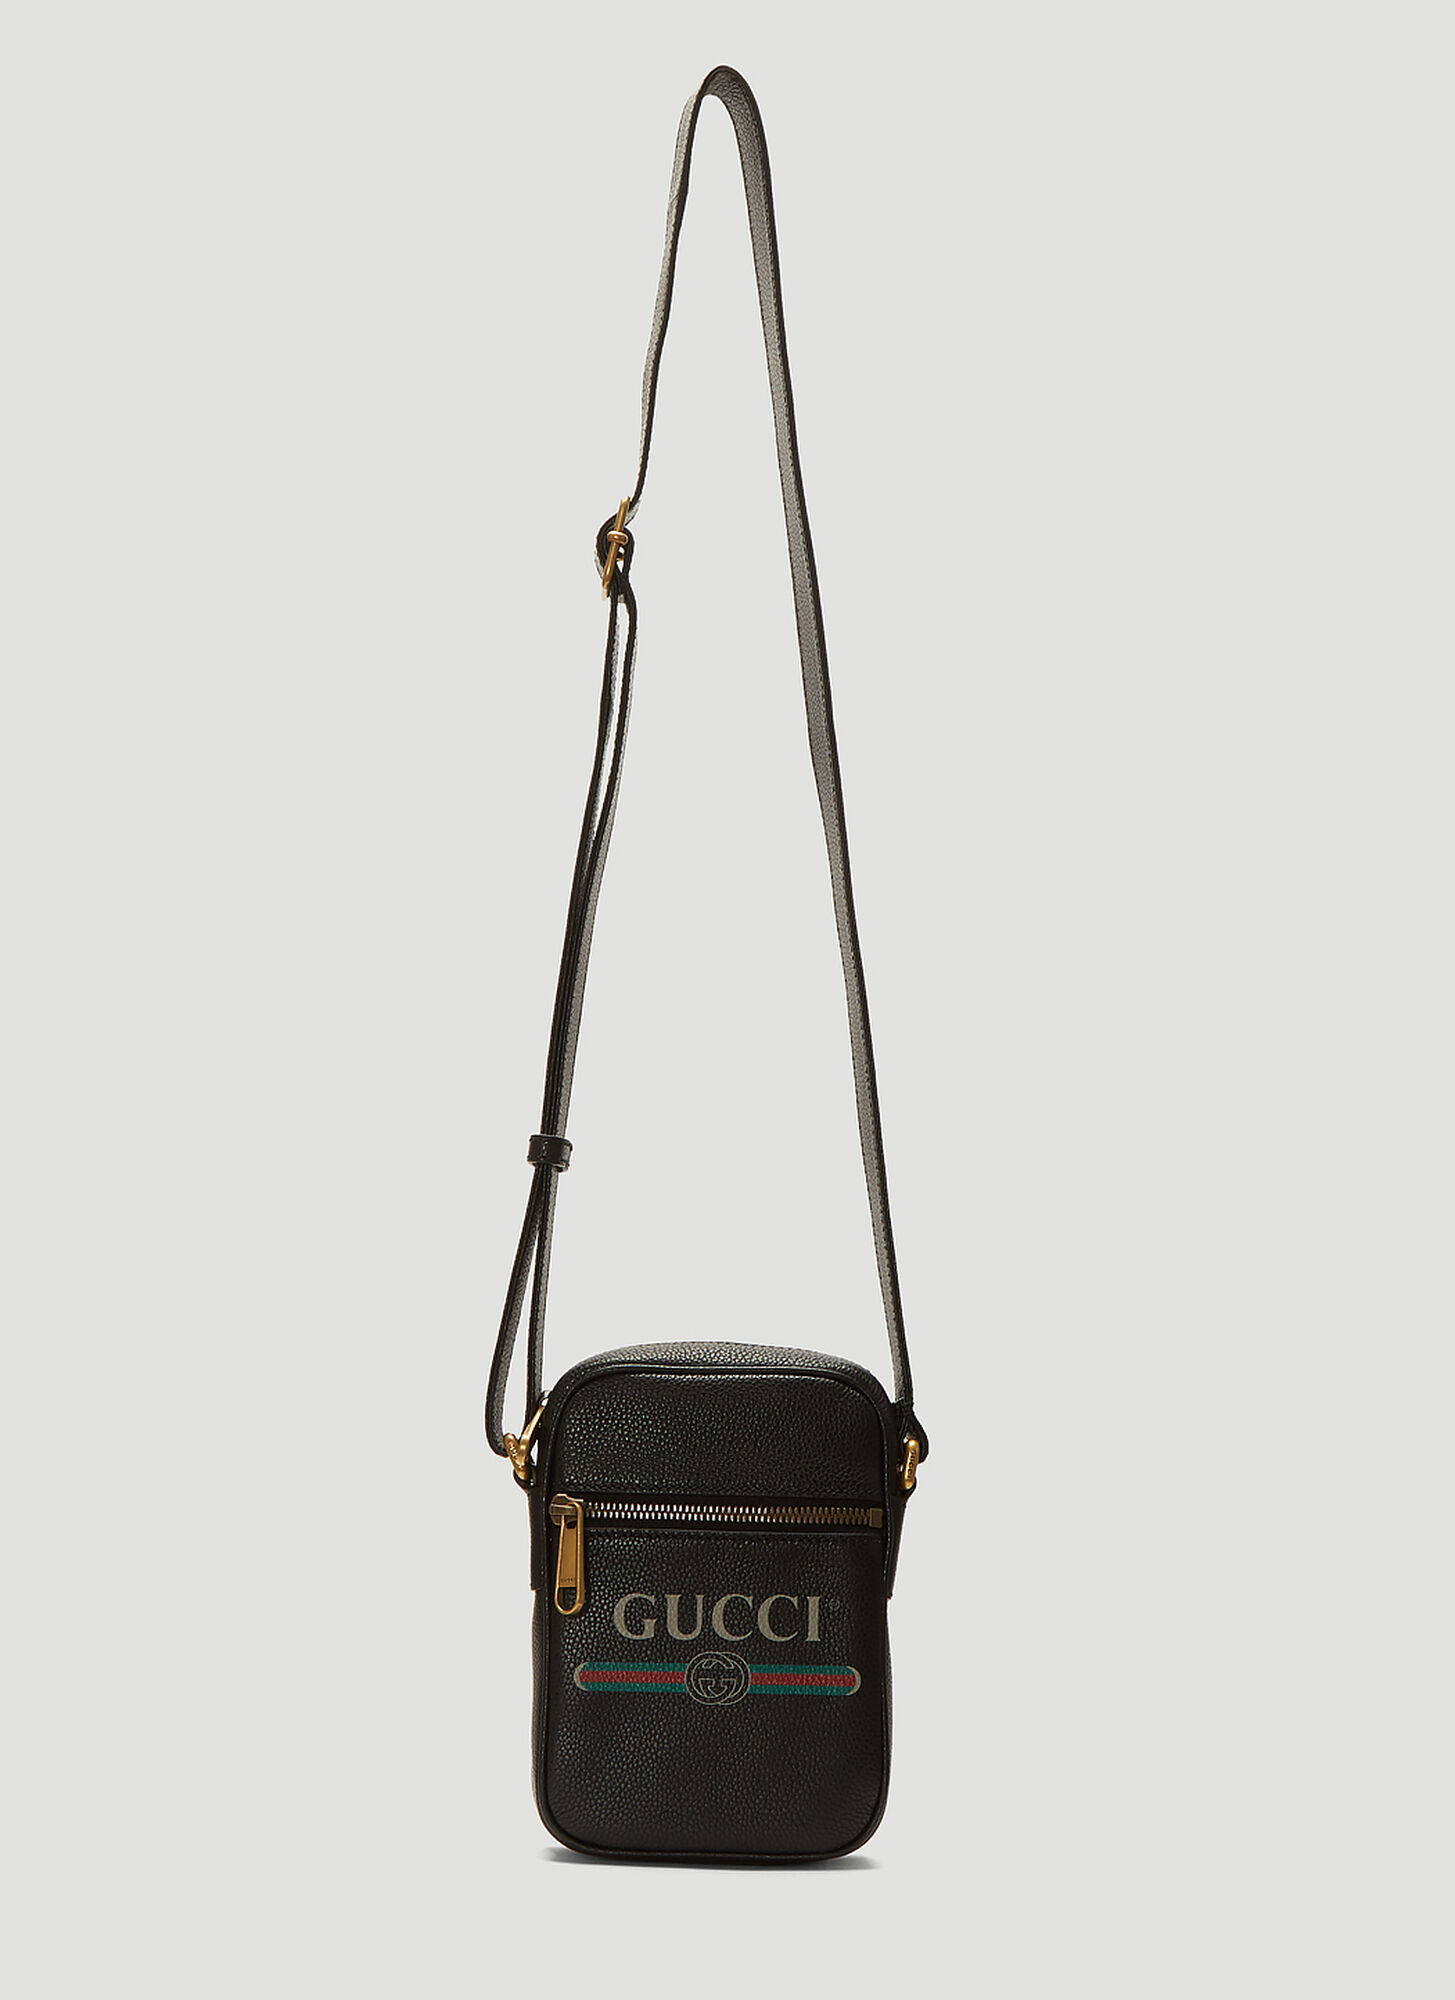 Gucci Logo Print Messenger Bag in Black size One Size | The Fashionisto